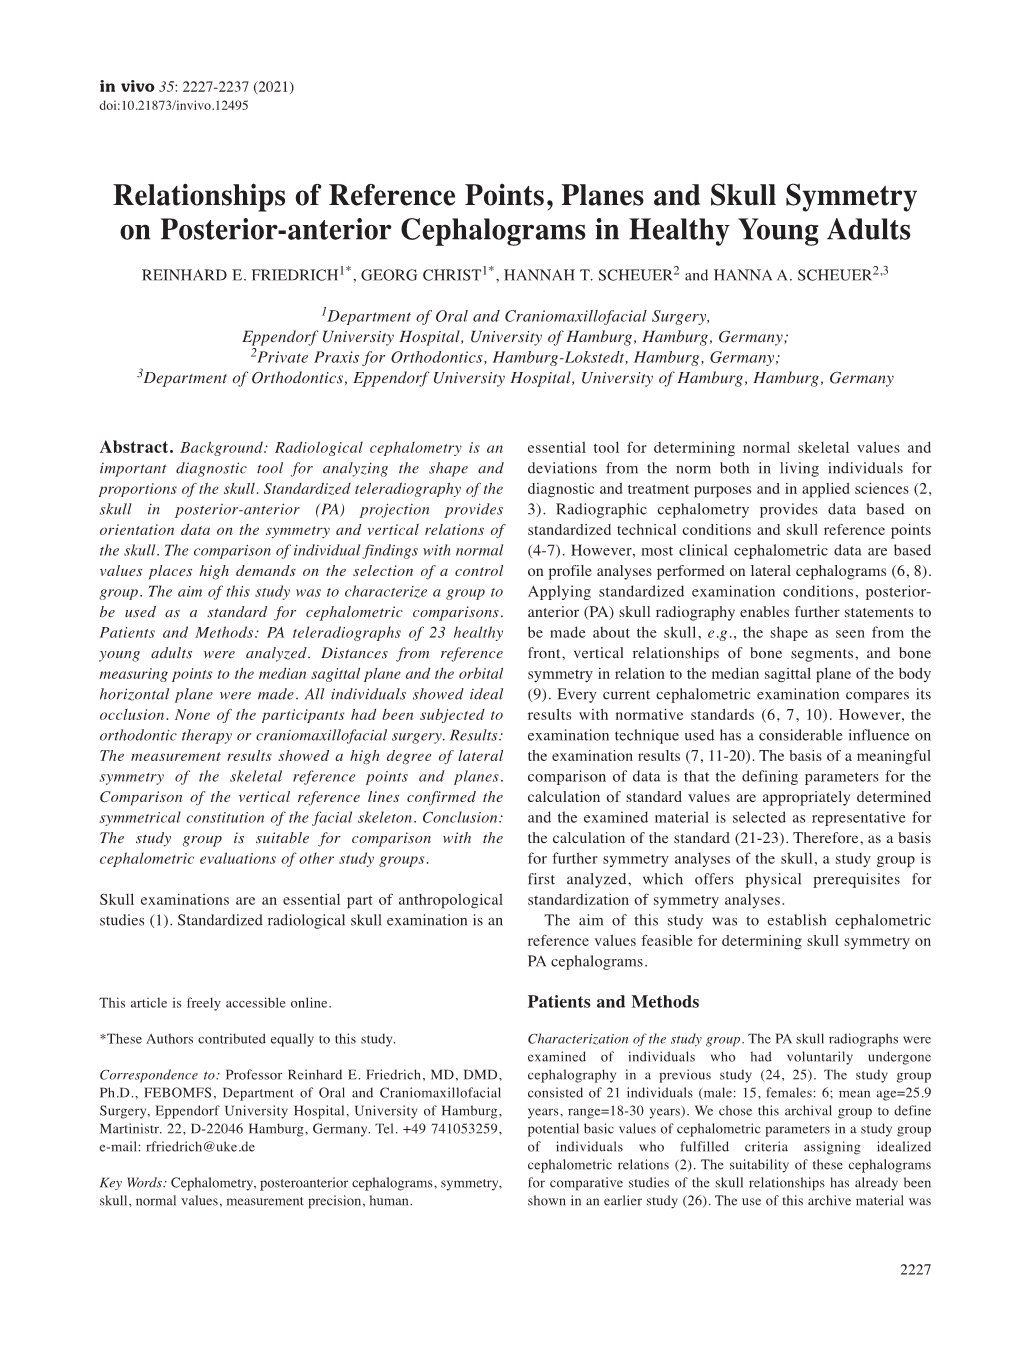 Relationships of Reference Points, Planes and Skull Symmetry on Posterior-Anterior Cephalograms in Healthy Young Adults REINHARD E